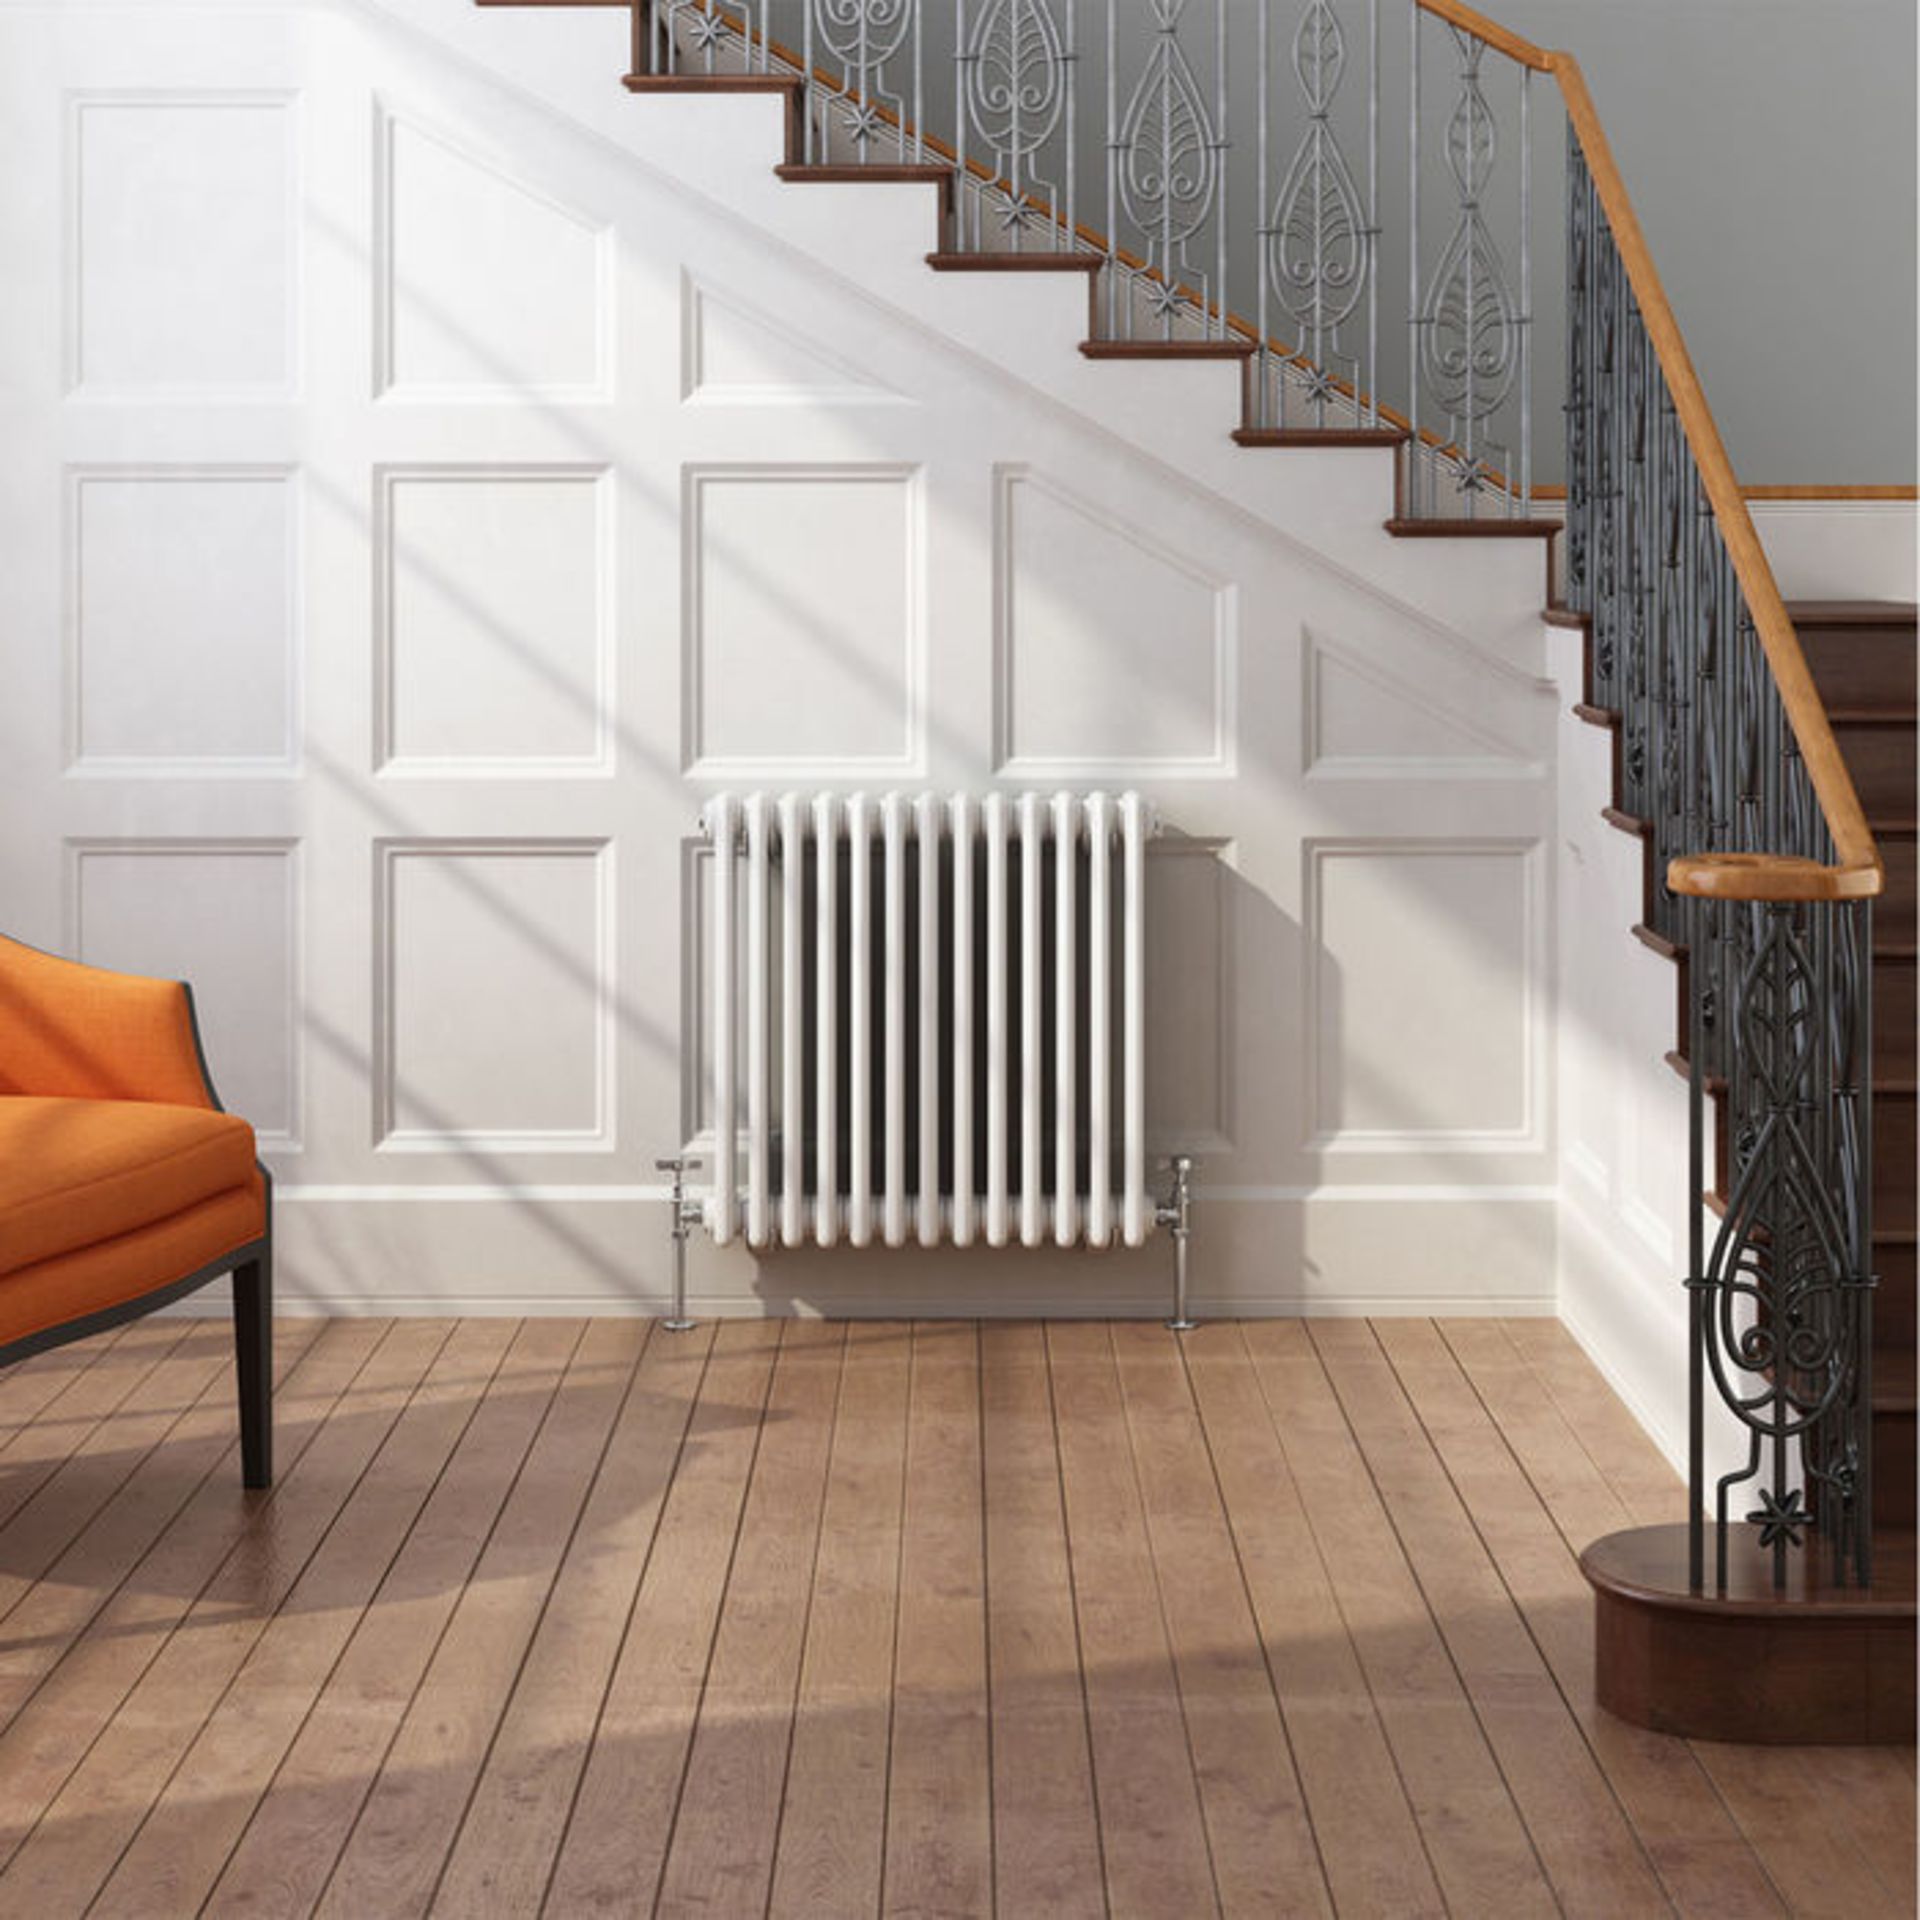 NEW (C112) 600x628mm White Double Panel Horizontal Colosseum Traditional Radiator. RRP £395.... - Image 2 of 3